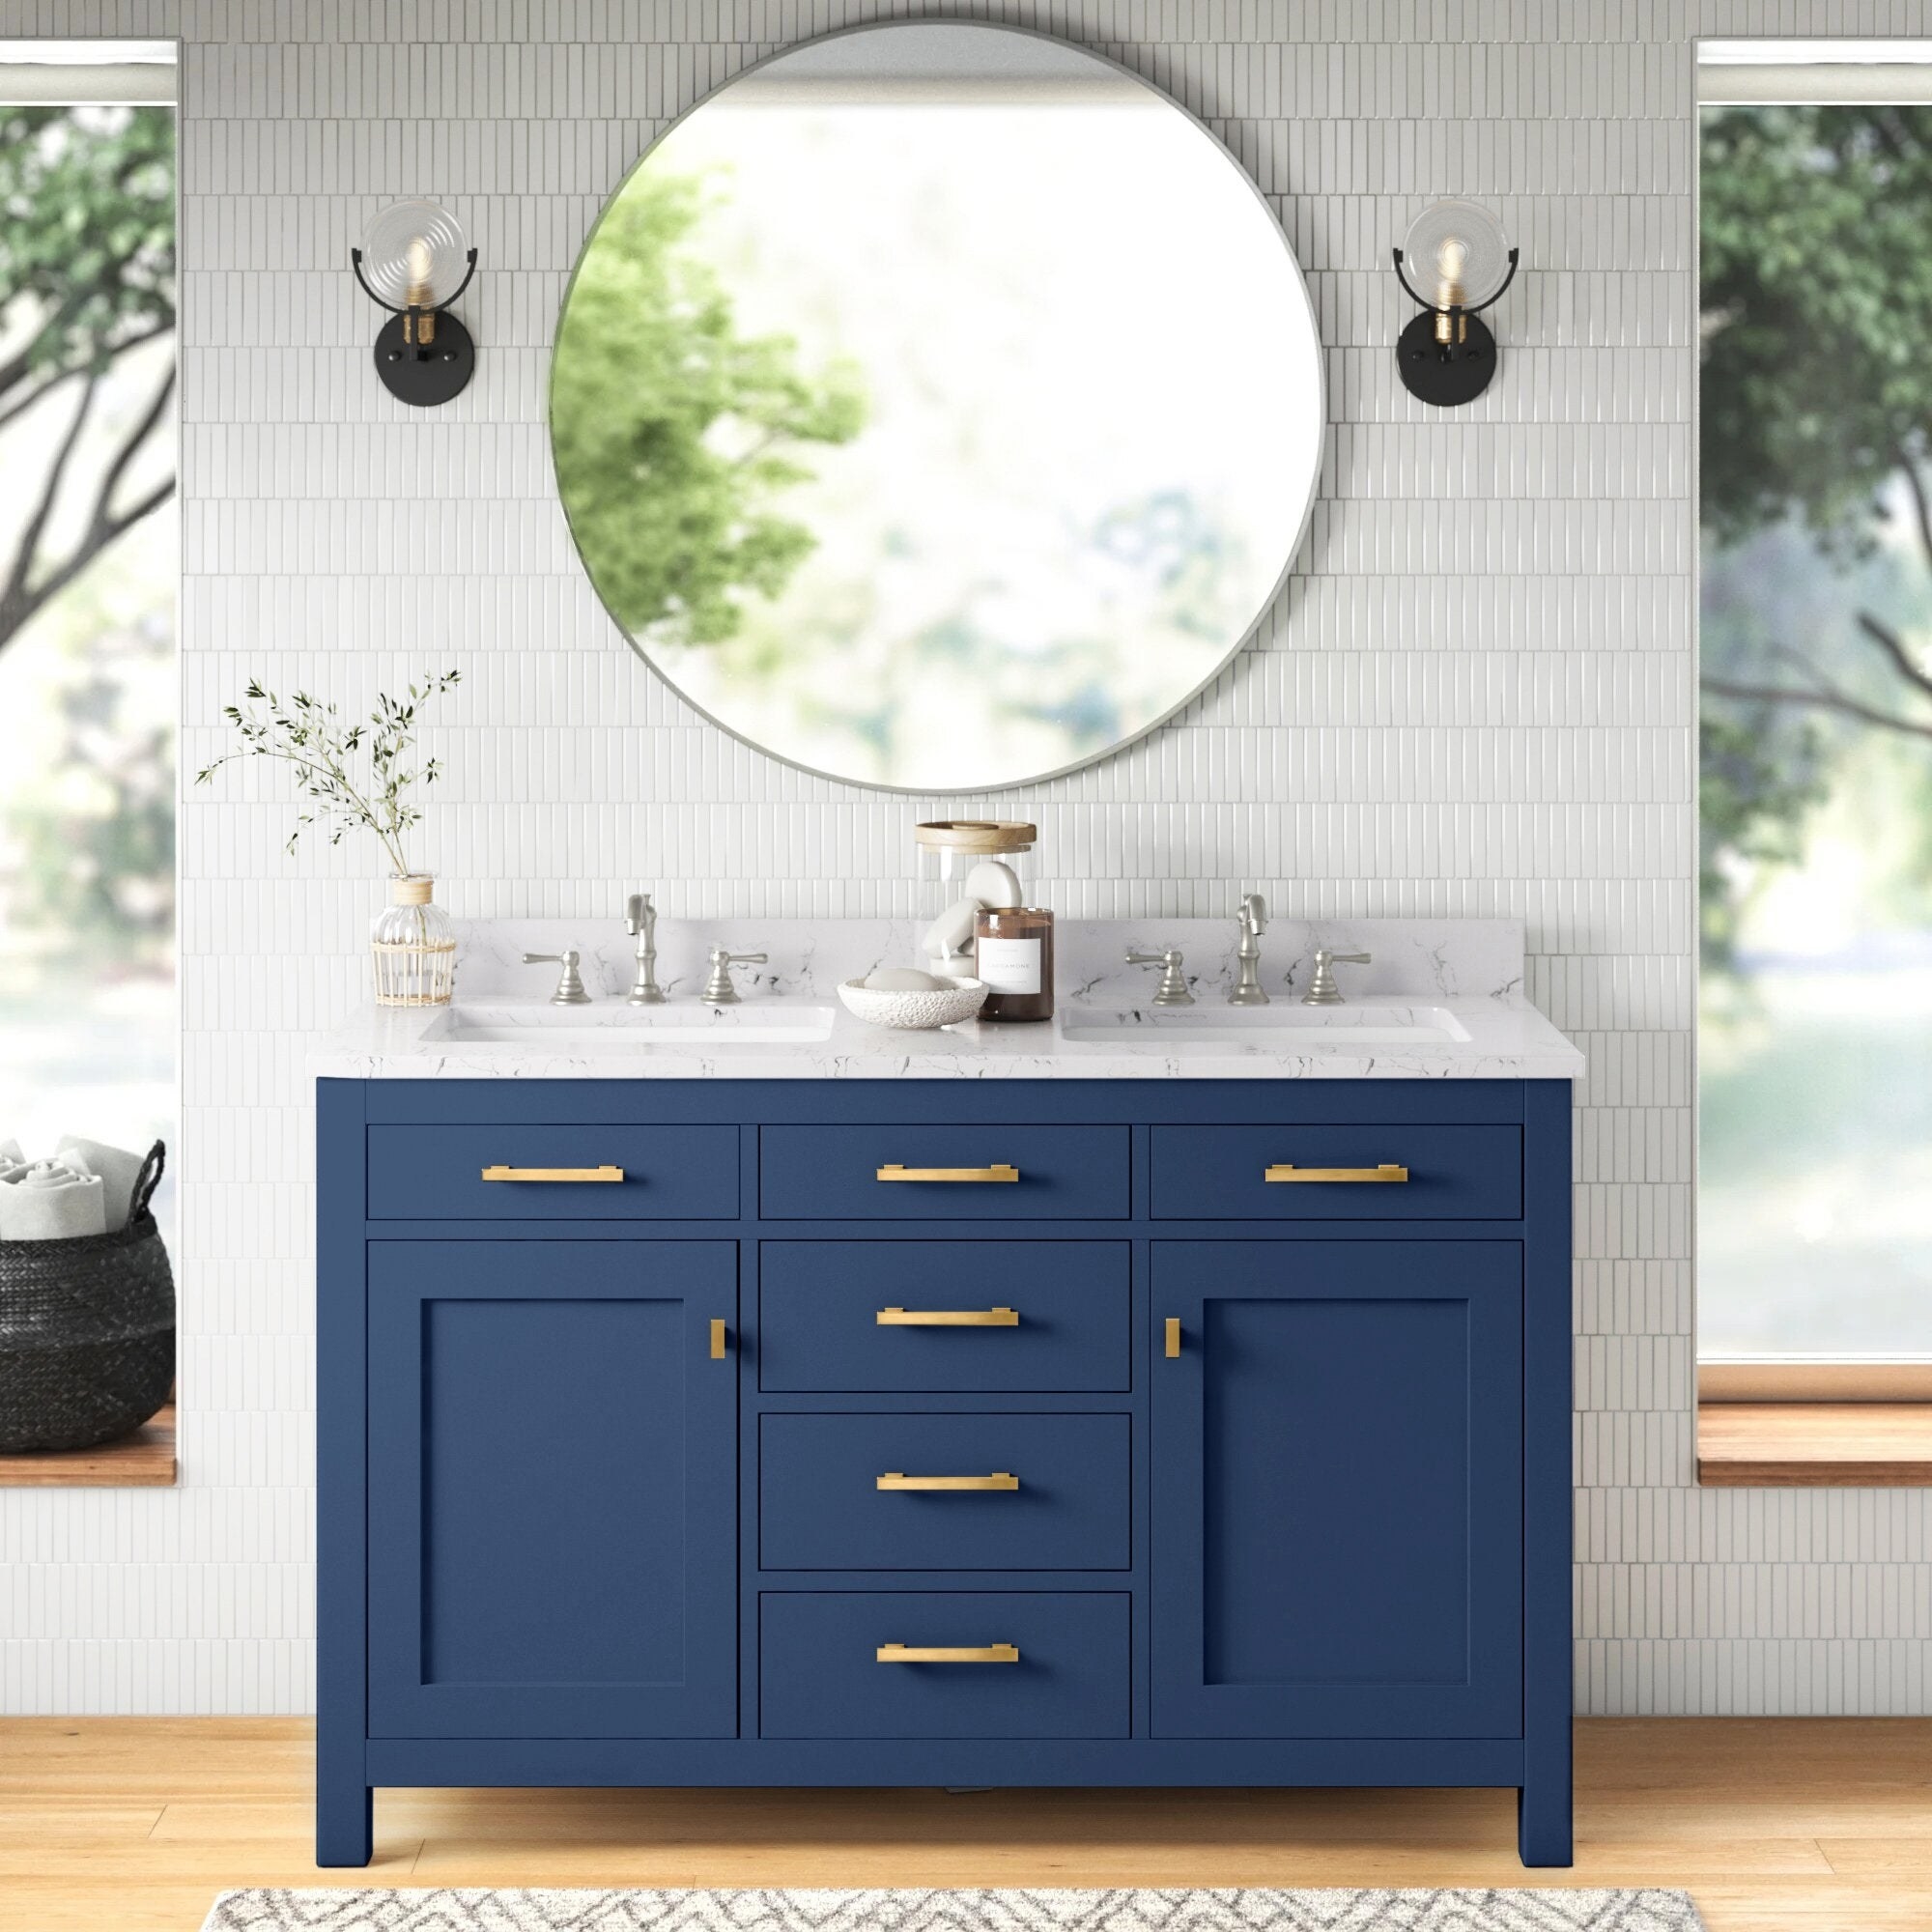 The double vanity in the color Navy Blue